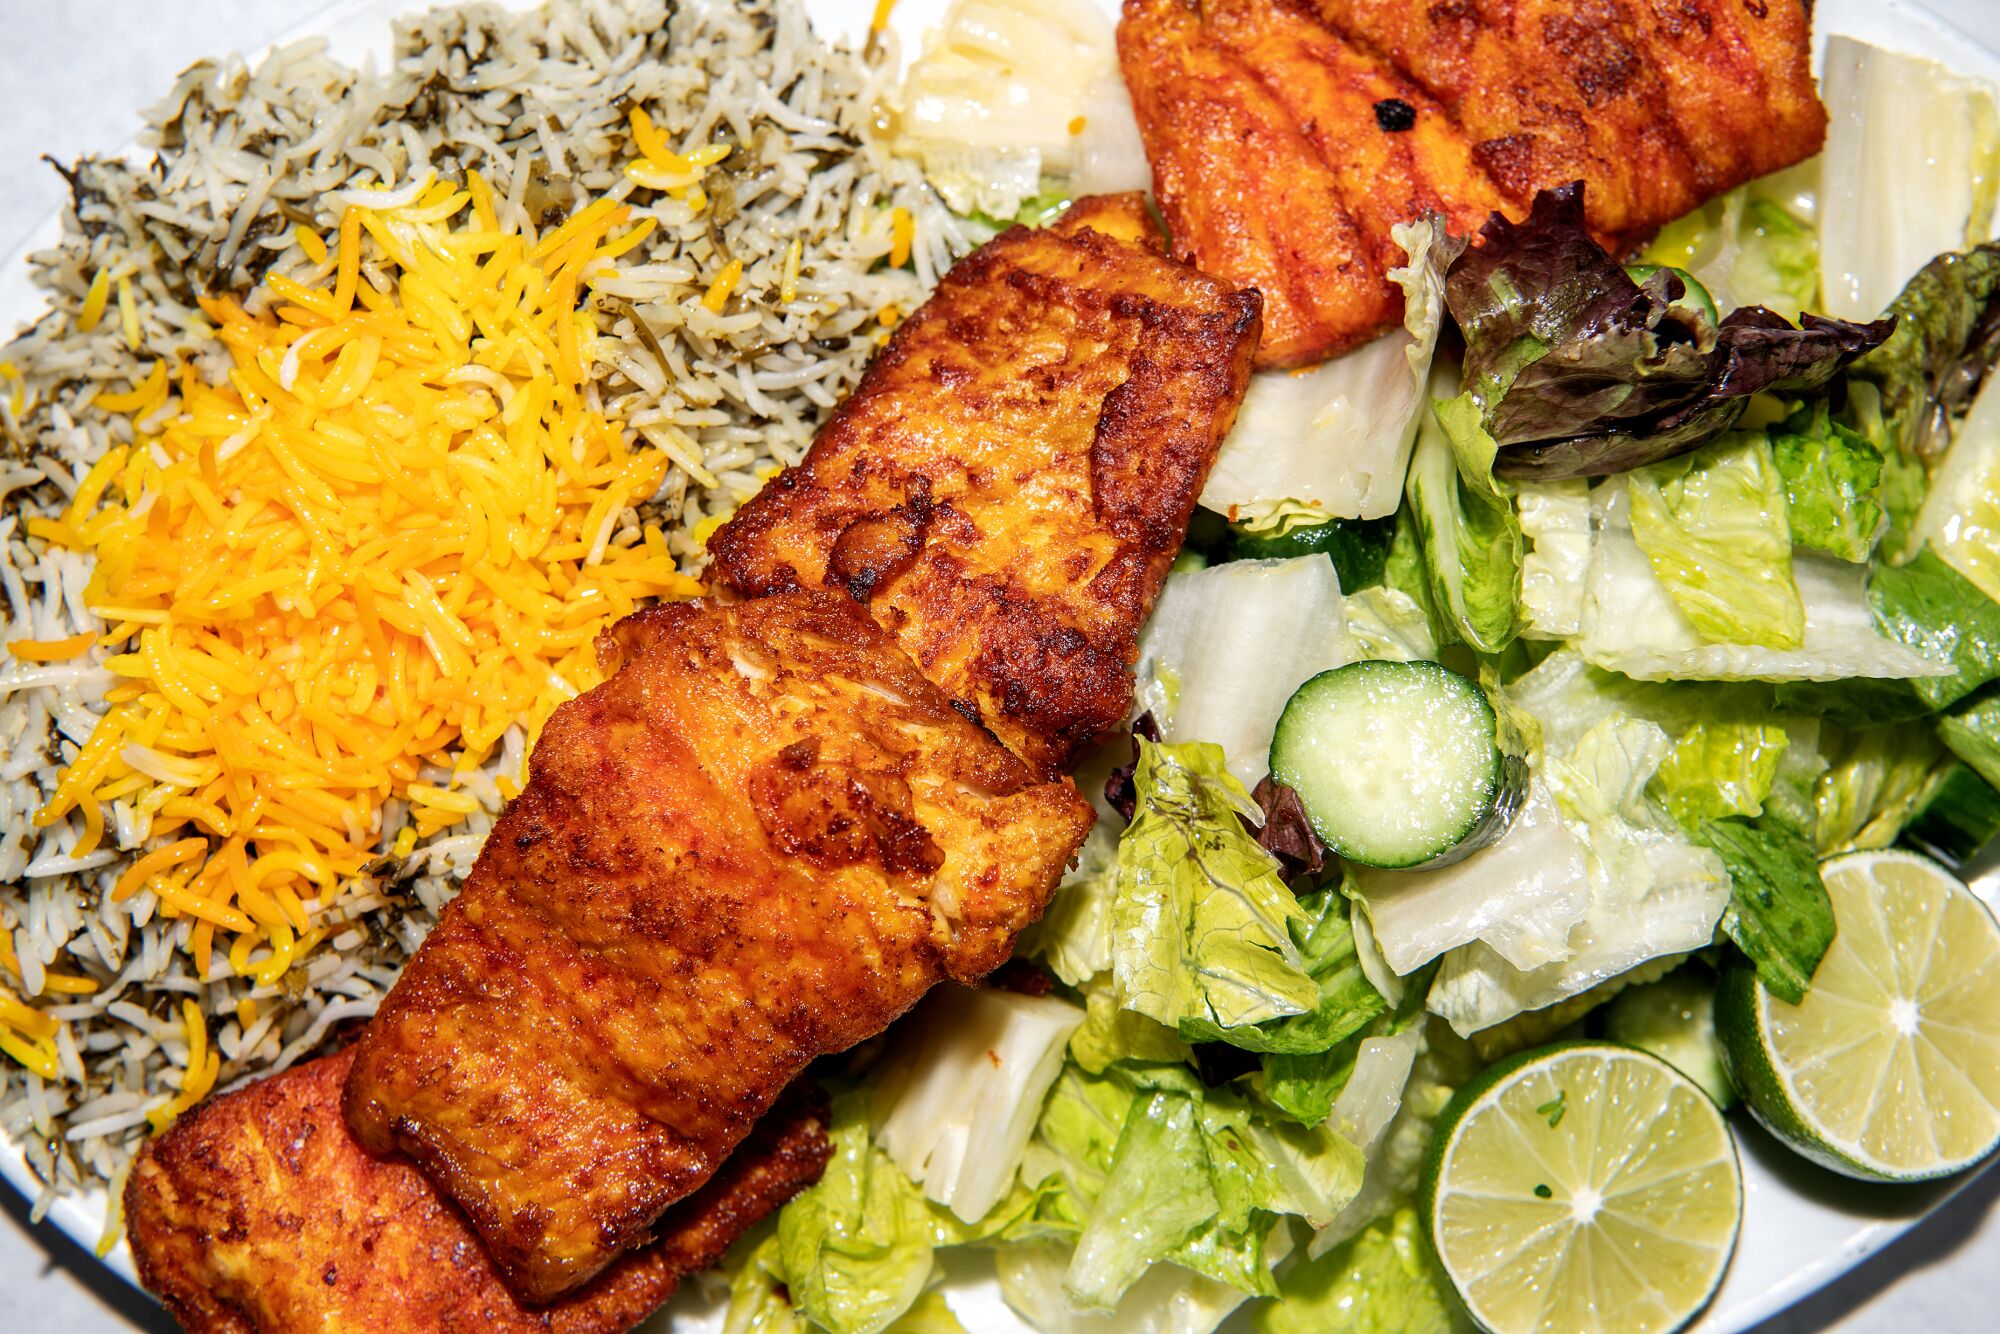 Overhead view of fried white fish with rice and salad from Darya